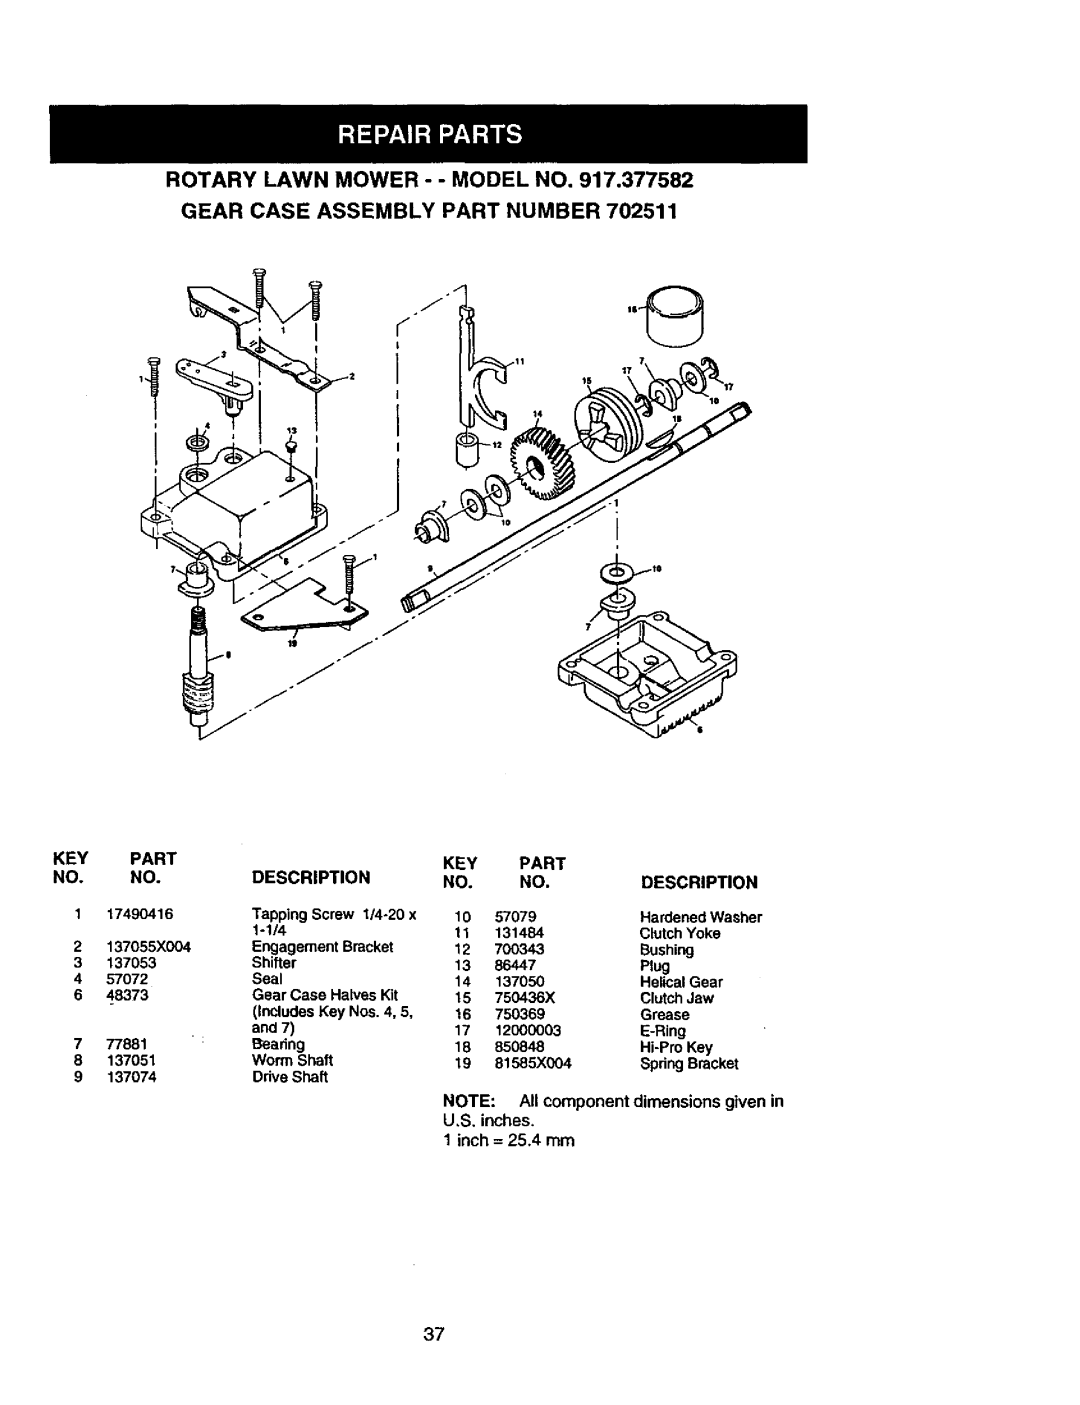 Craftsman 917.377582 owner manual Rotary Lawn Mower - - Model No, Gear Case Assembly Part Number 